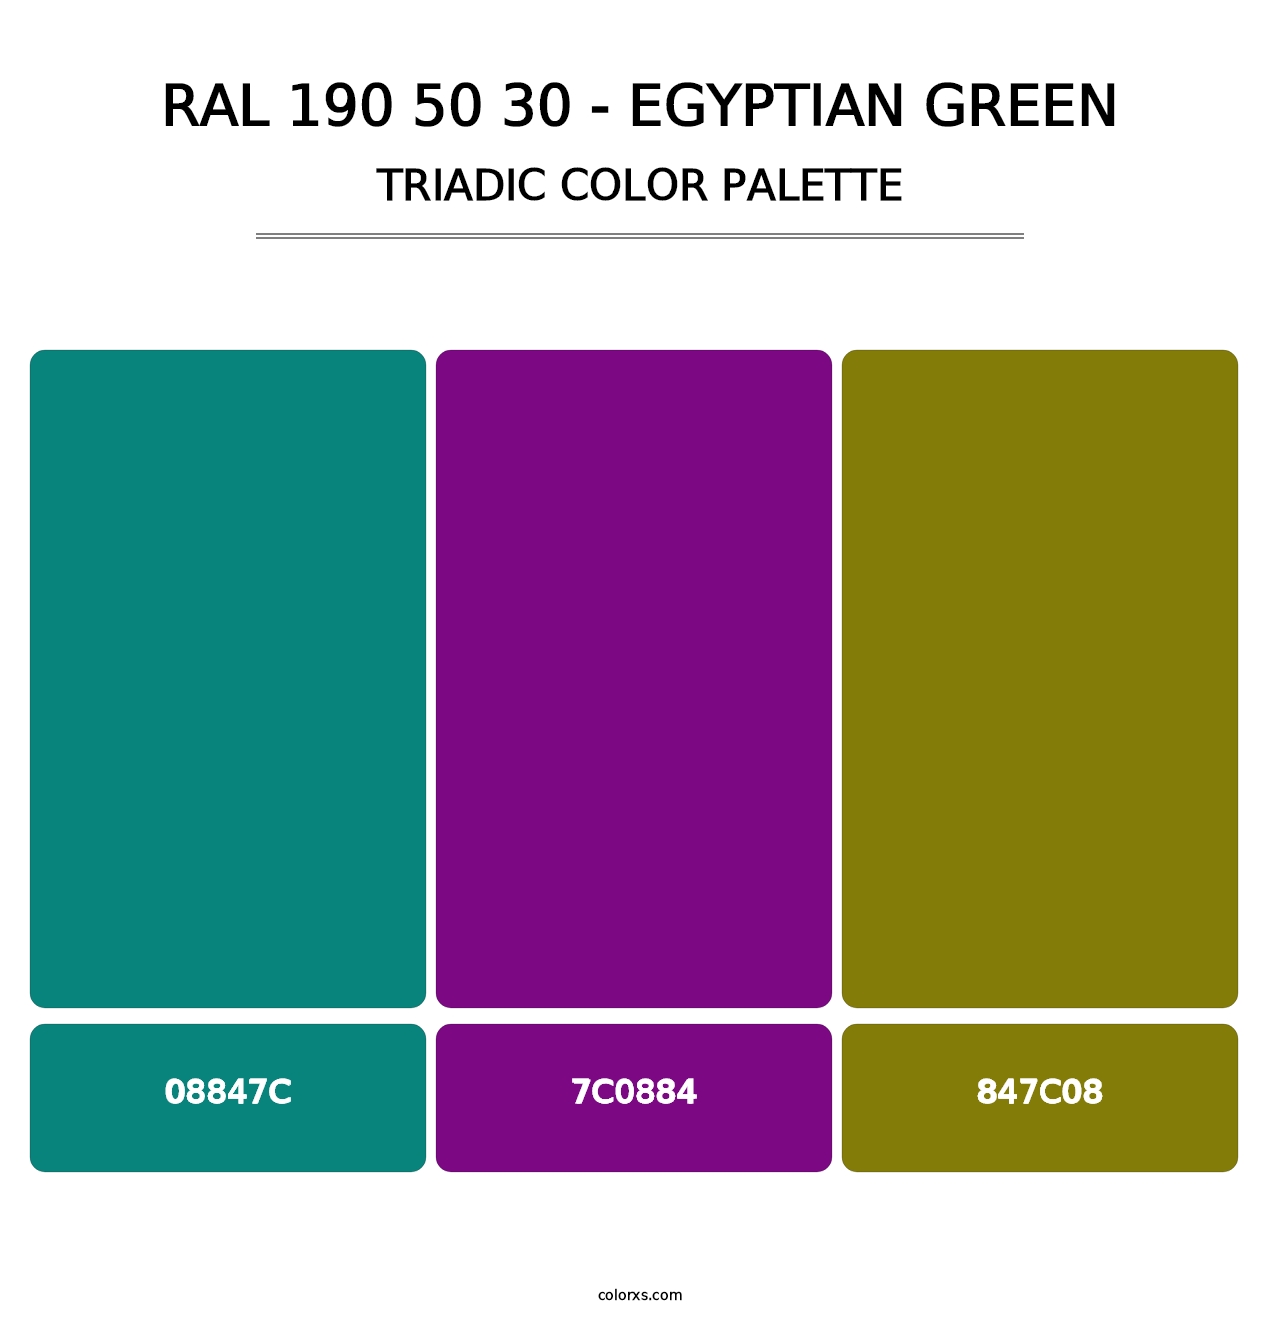 RAL 190 50 30 - Egyptian Green - Triadic Color Palette